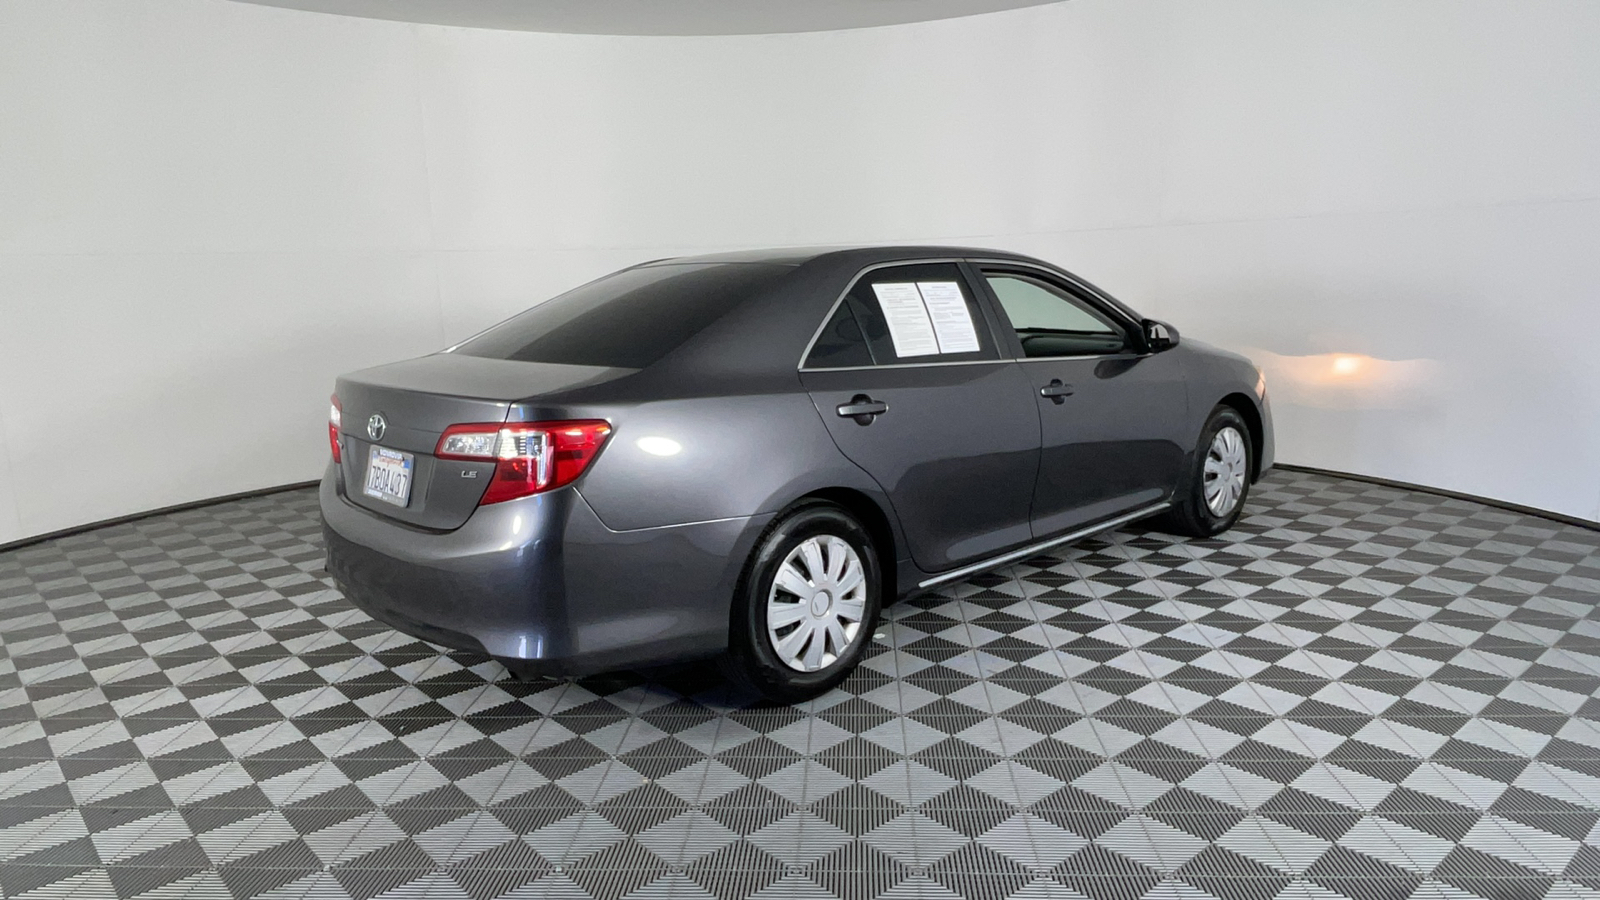 2013 Toyota Camry LE 4